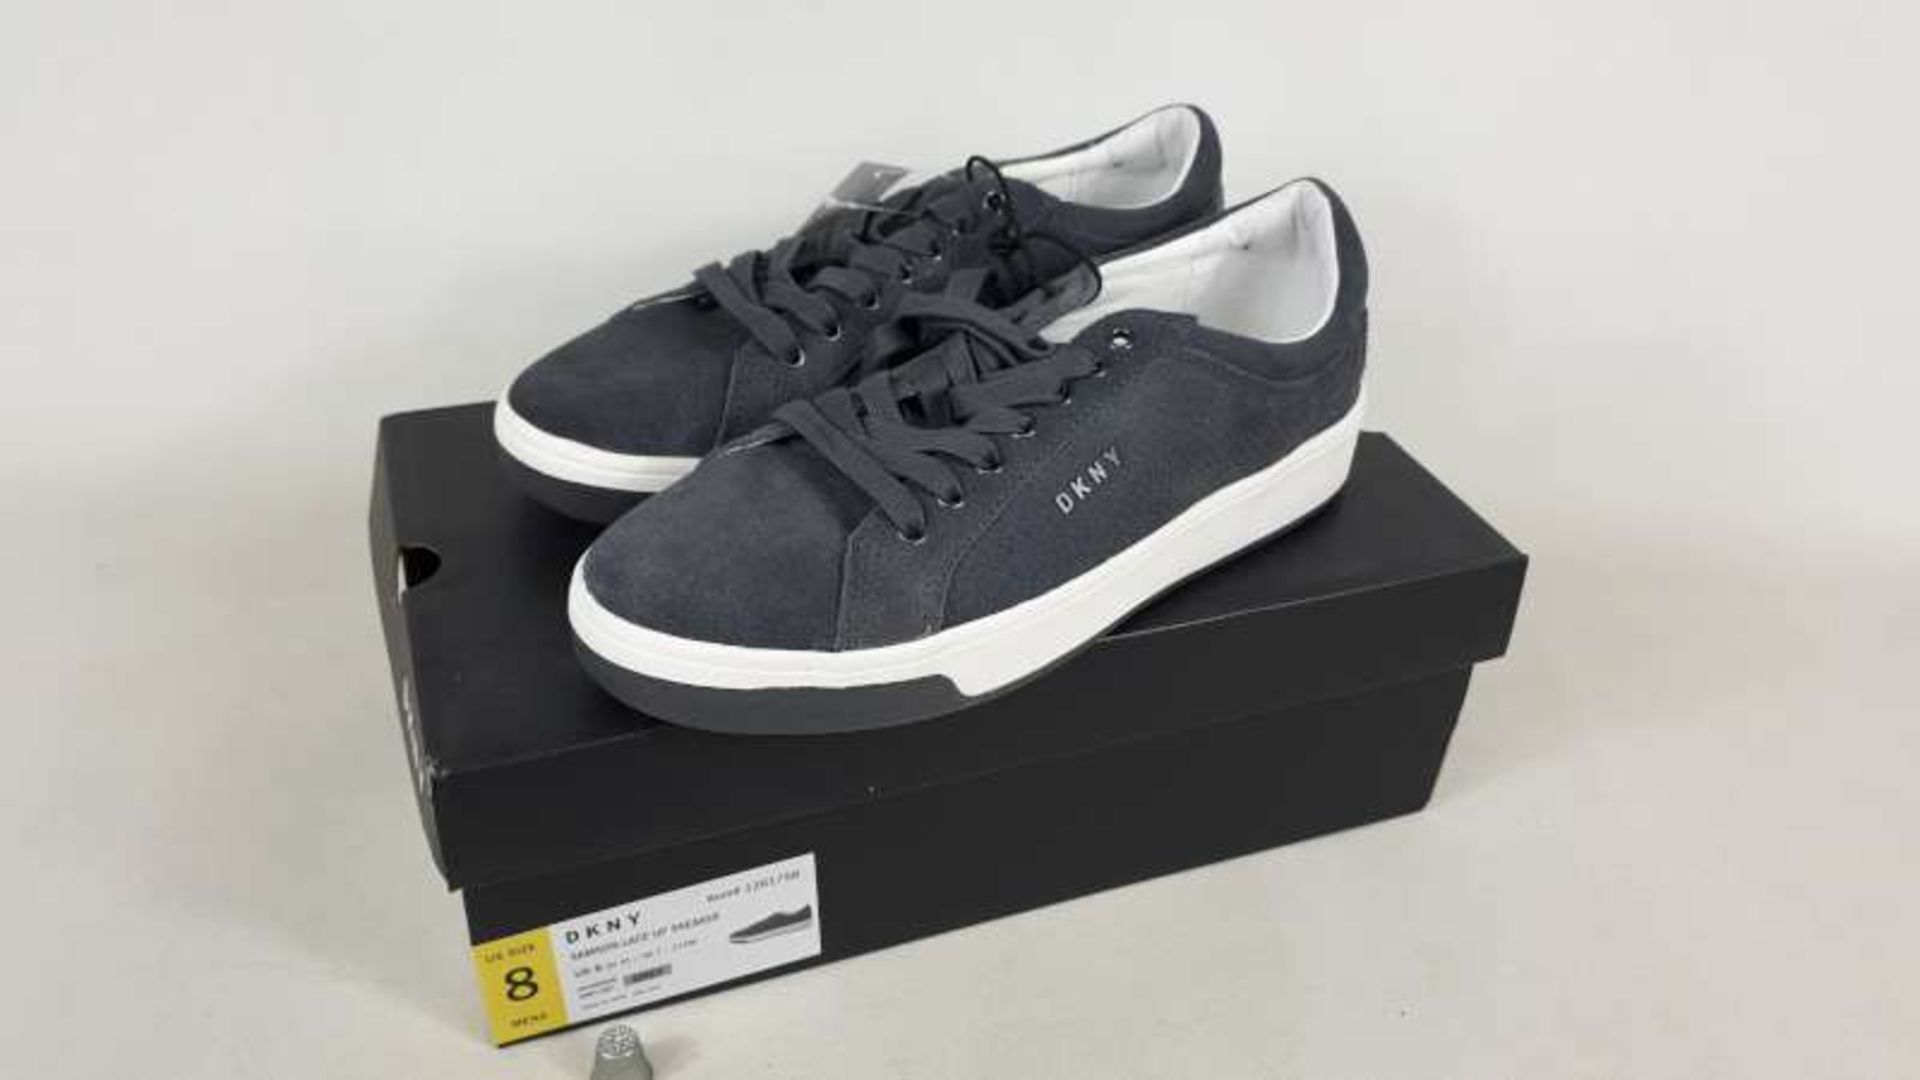 11 X PAIRS OF DKNY SAMSON LACE UP TRAINERS IN SIZES 7.5 / 7